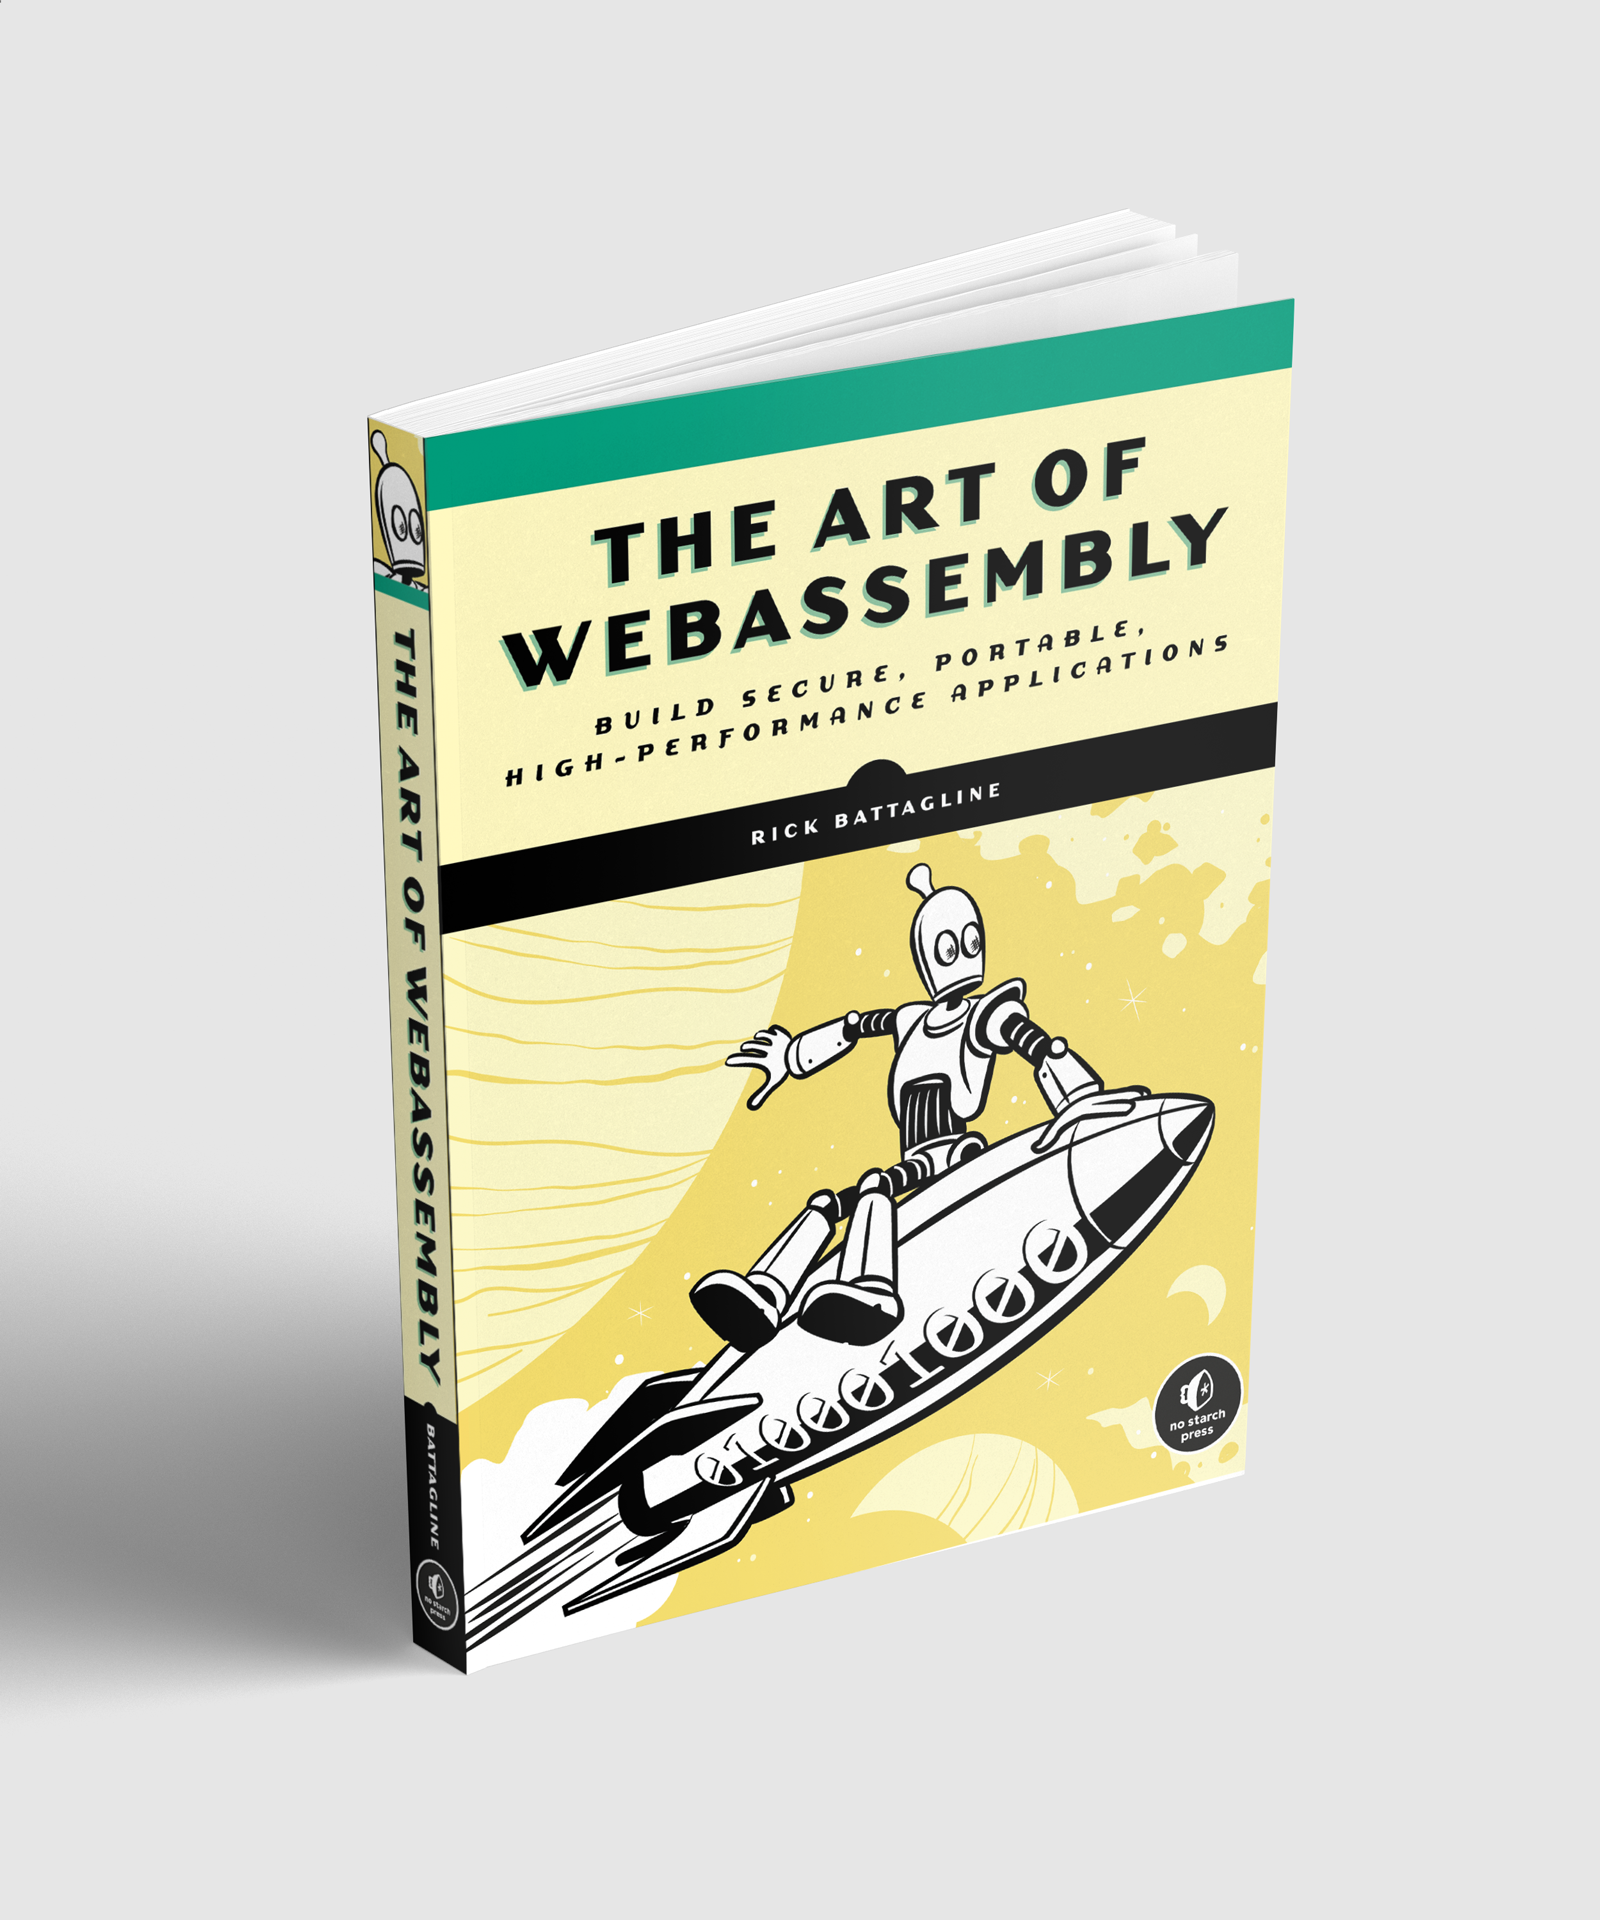 The Art of WebAssembly